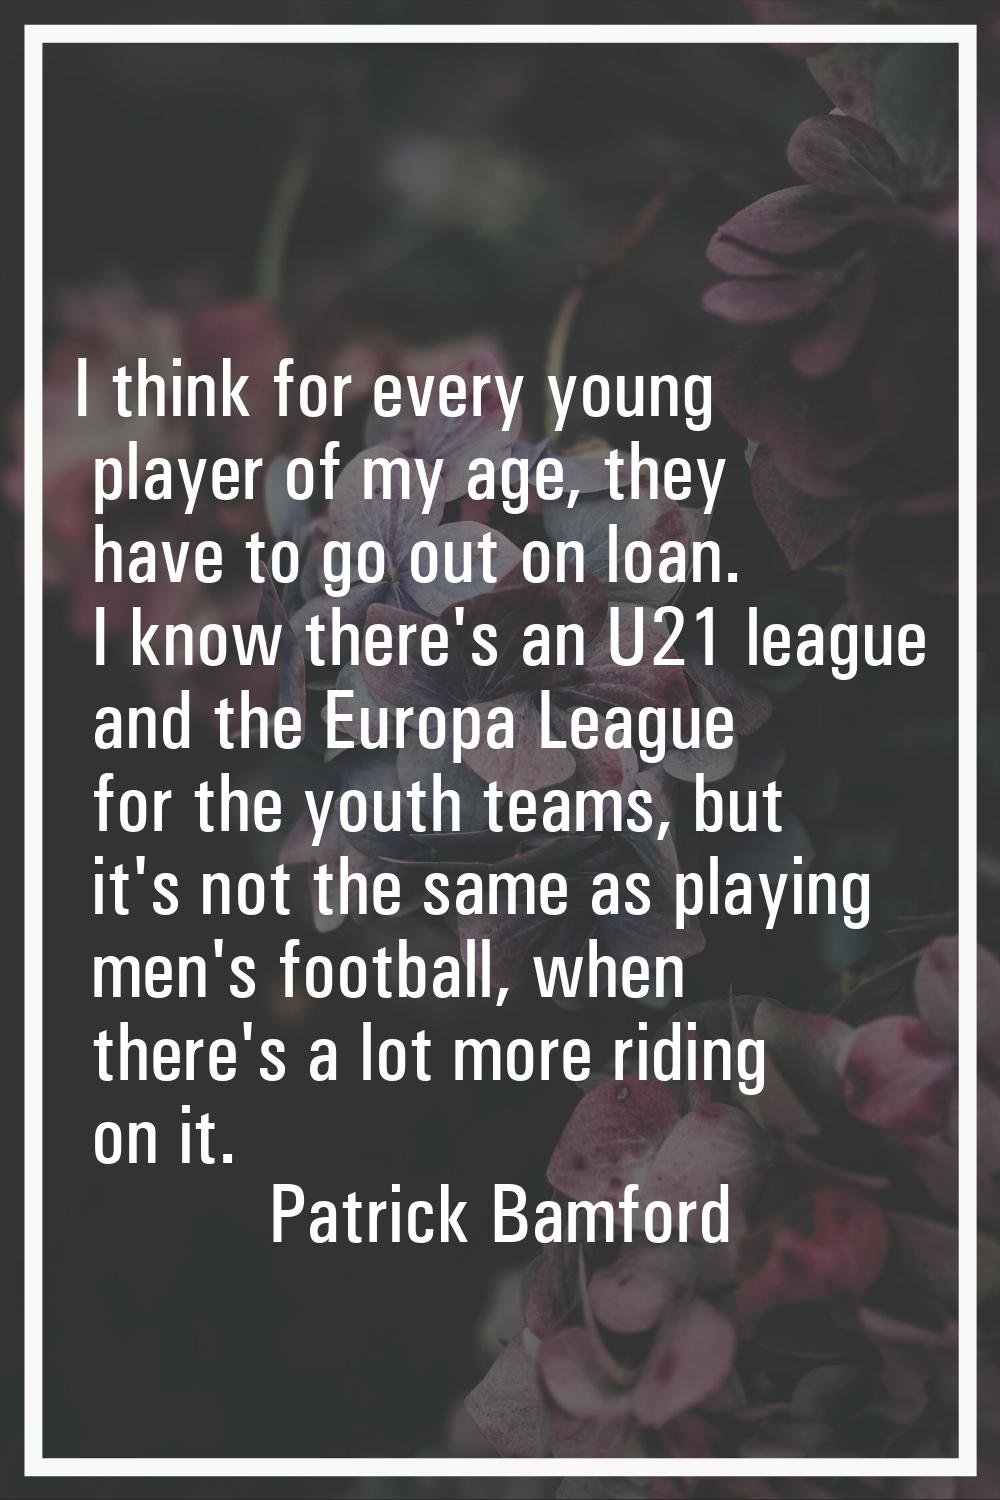 I think for every young player of my age, they have to go out on loan. I know there's an U21 league